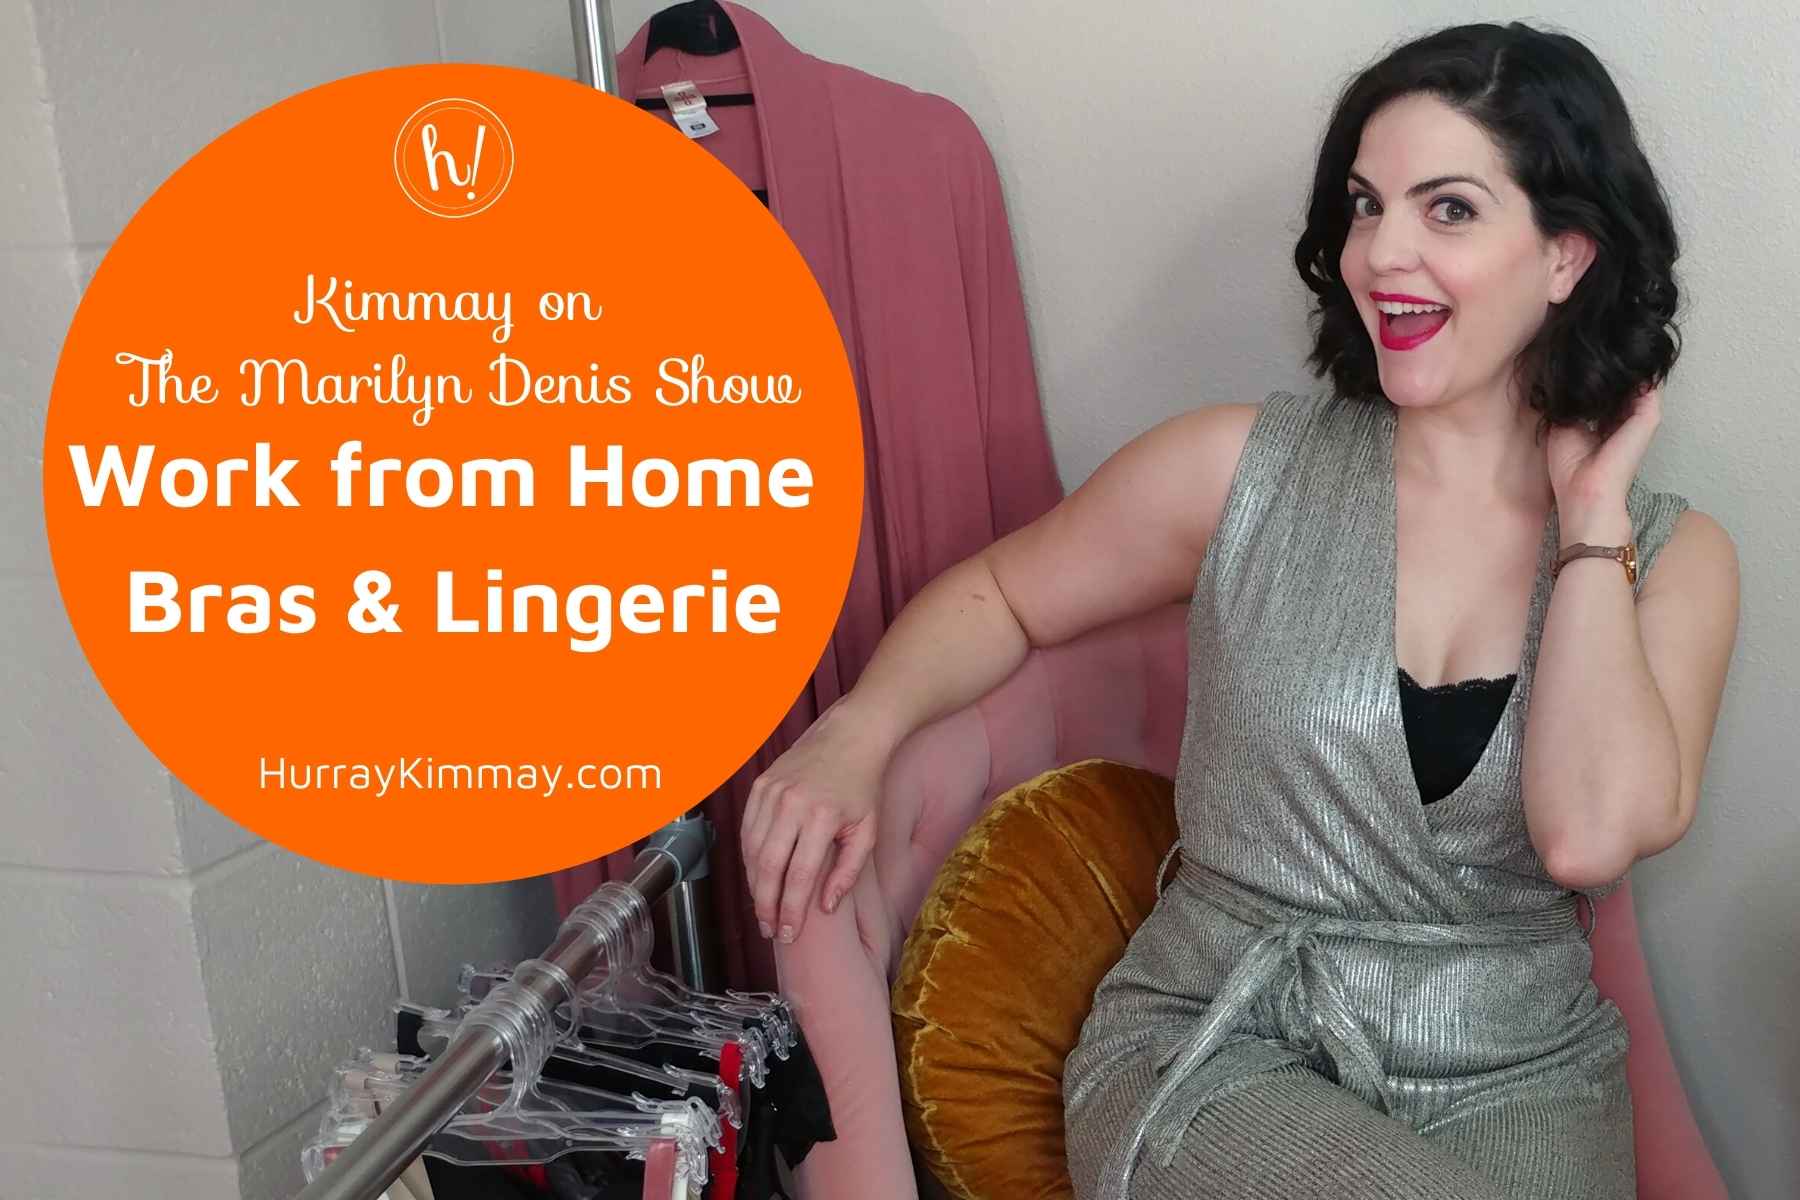 How To Find Your Bra Size: Video Guide - Hurray Kimmay